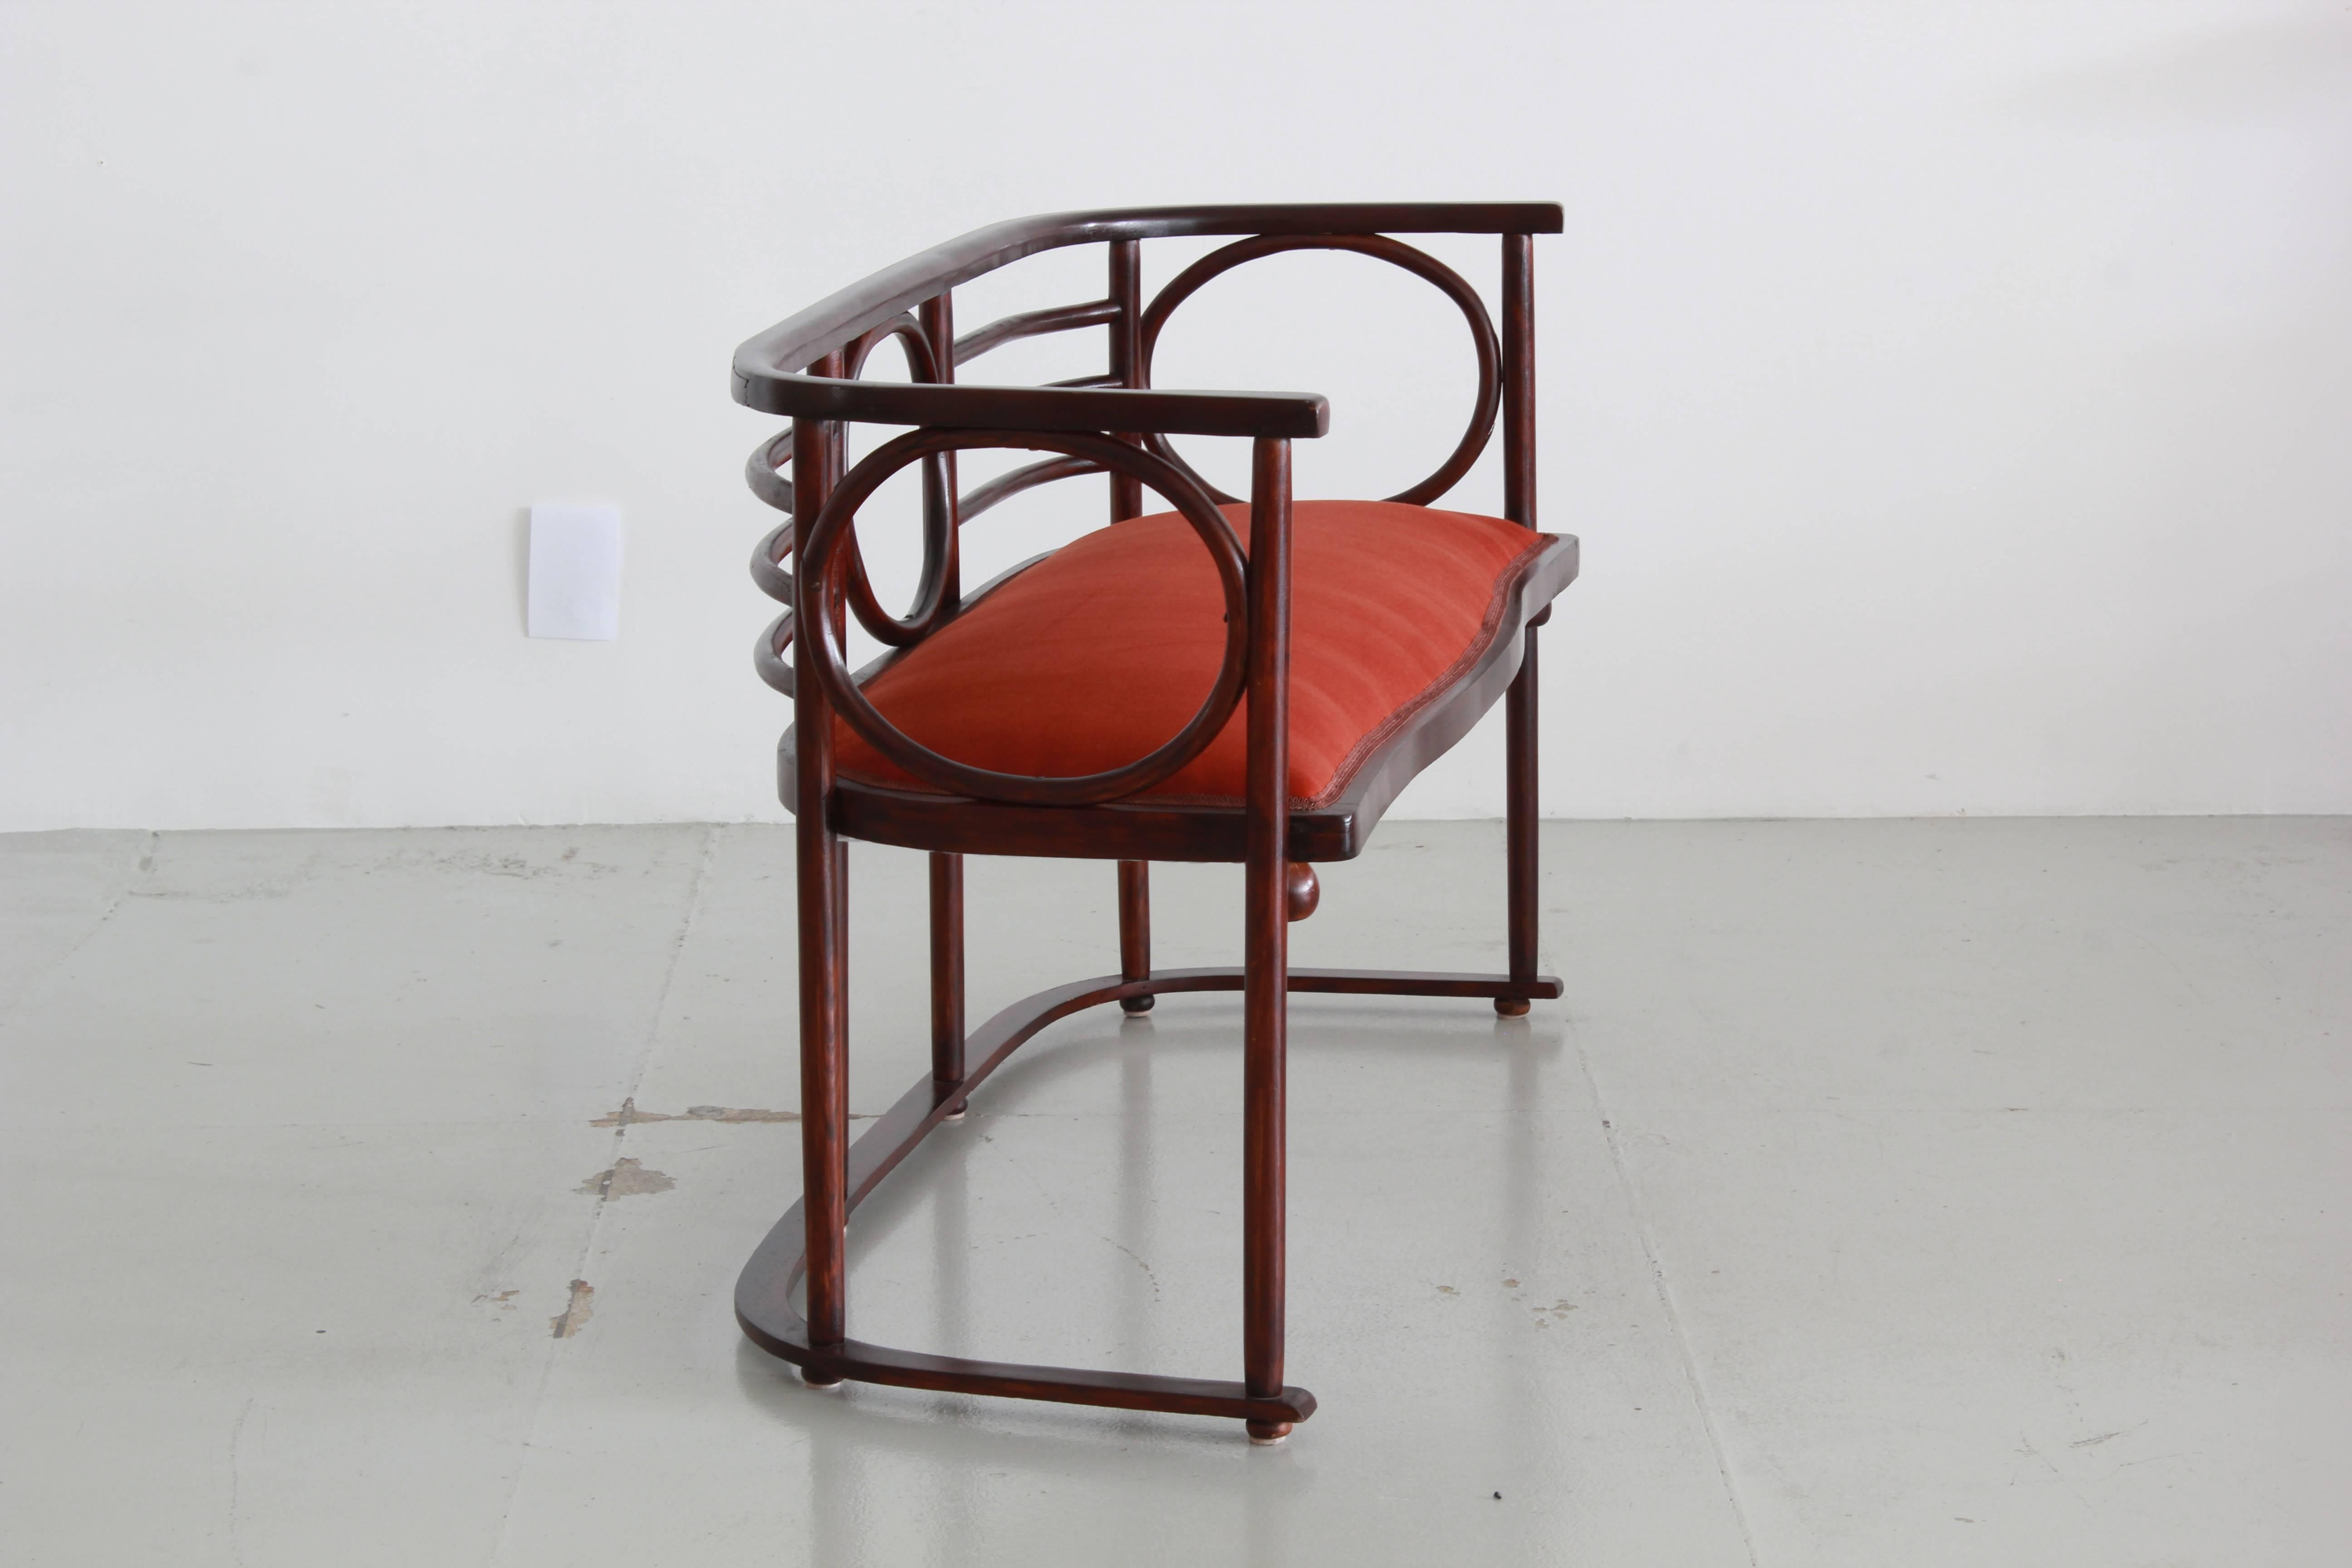 Gorgeous settee by Austrian architect Josef Hoffman, in the Fledermaus style. One of the founding fathers of the Vienna Succession and the International Style, influencing such masters as Alvar Aalto, Le Corbusier, and Carlo Scarpa, he is celebrated